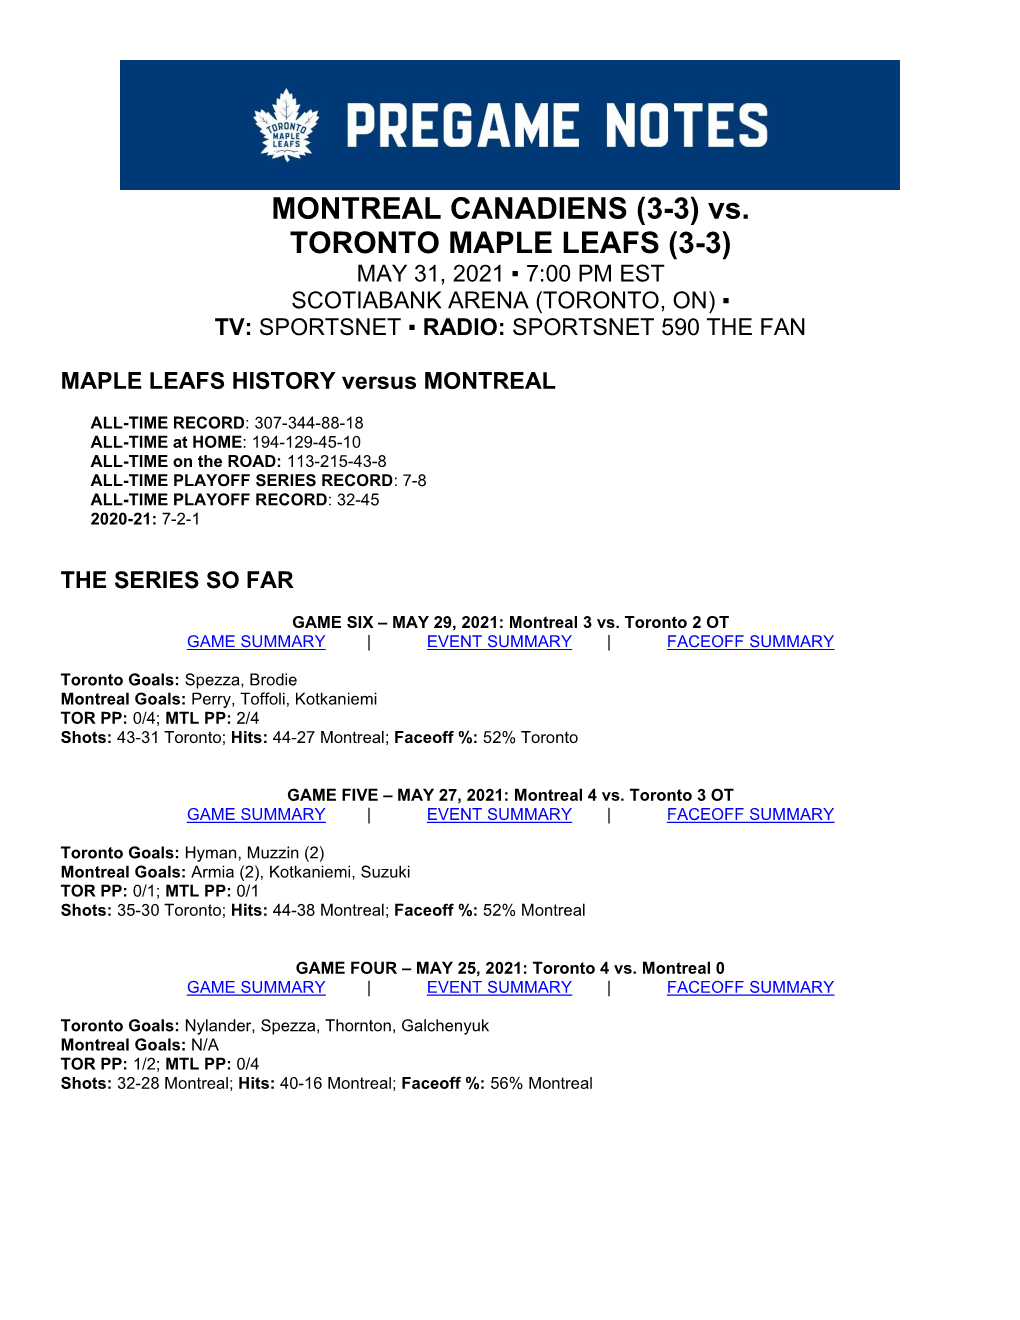 MONTREAL CANADIENS (3-3) Vs. TORONTO MAPLE LEAFS (3-3) MAY 31, 2021 ▪ 7:00 PM EST SCOTIABANK ARENA (TORONTO, ON) ▪ TV: SPORTSNET ▪ RADIO: SPORTSNET 590 the FAN